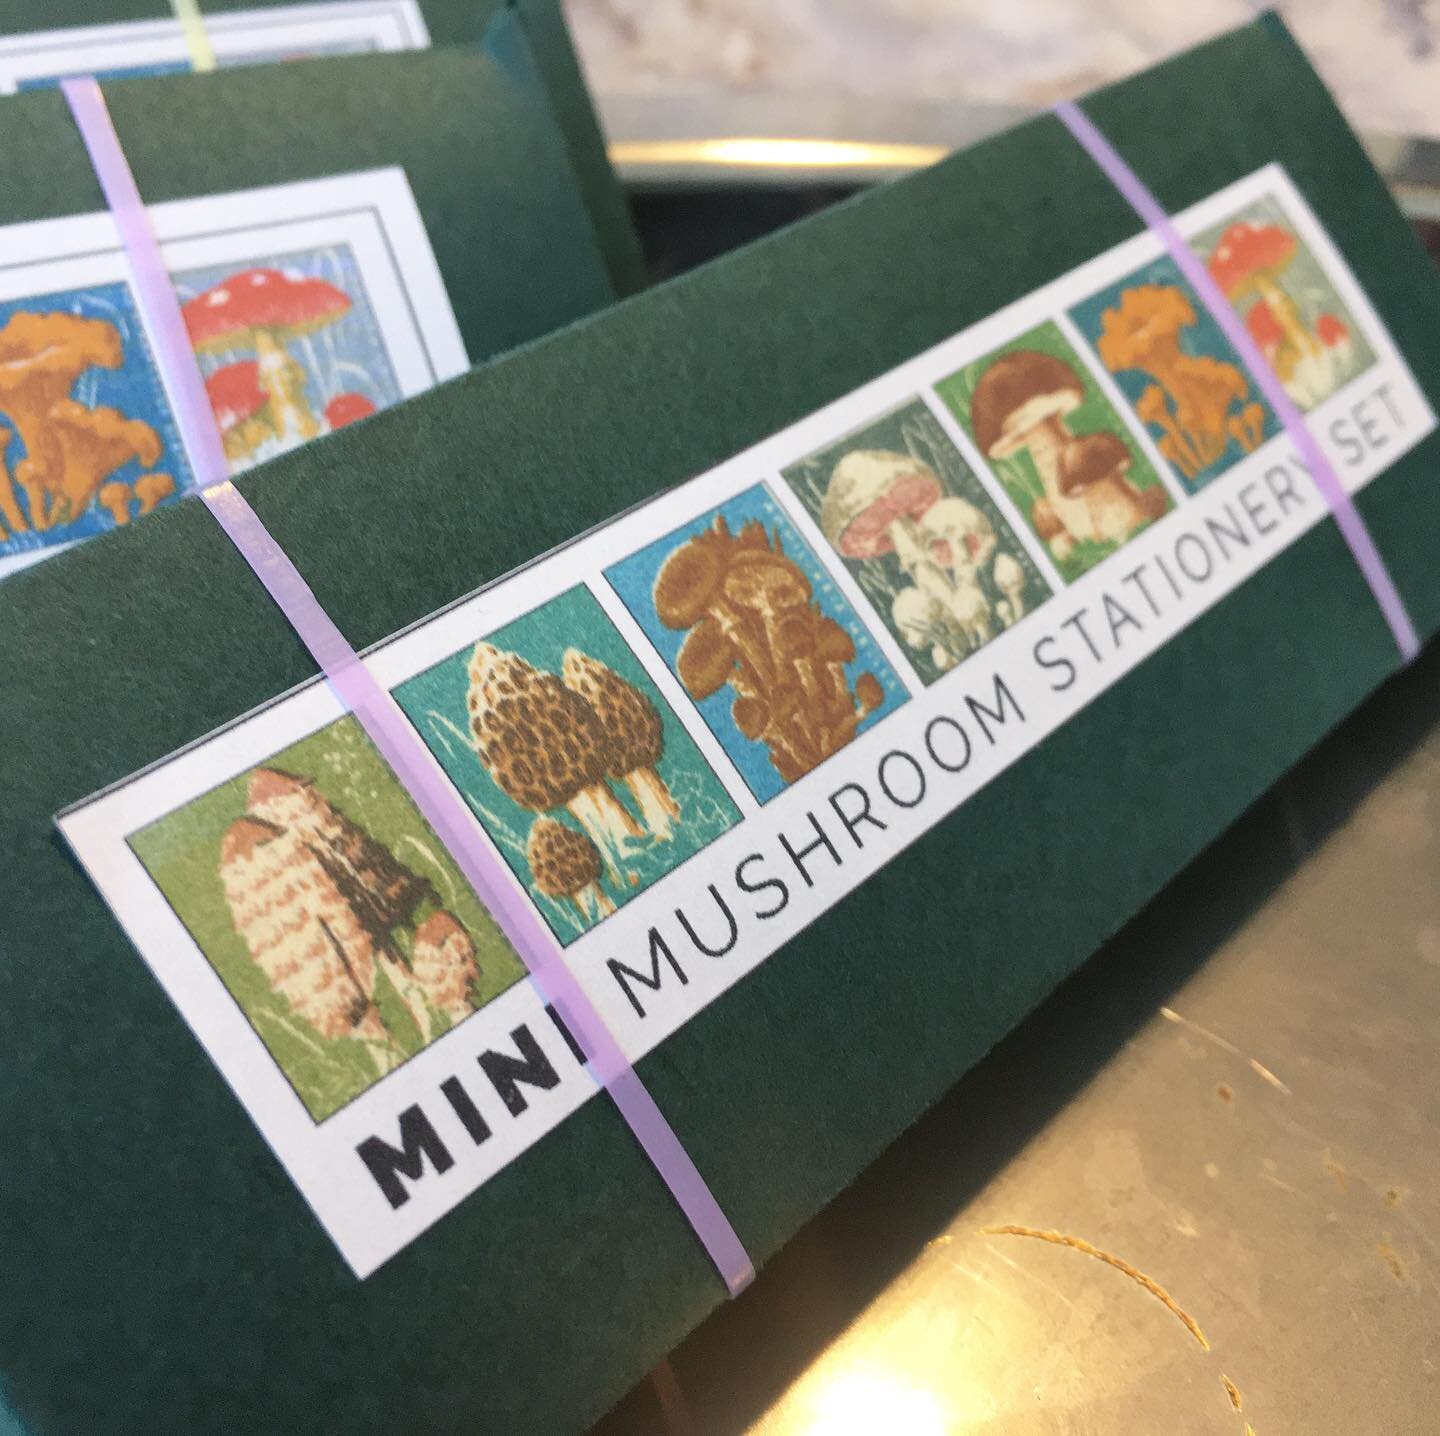 Mini Mushroom Stationery Sets are here! Super limited quantity, now available in my Shop (link in bio)!
#jeanettemadethis #jaylilliane #mushrooms #mini #stationery #papercraft #sandiegoart #sandiegoartists #fungi #mushroomgoods #stationerysets #sdmyc